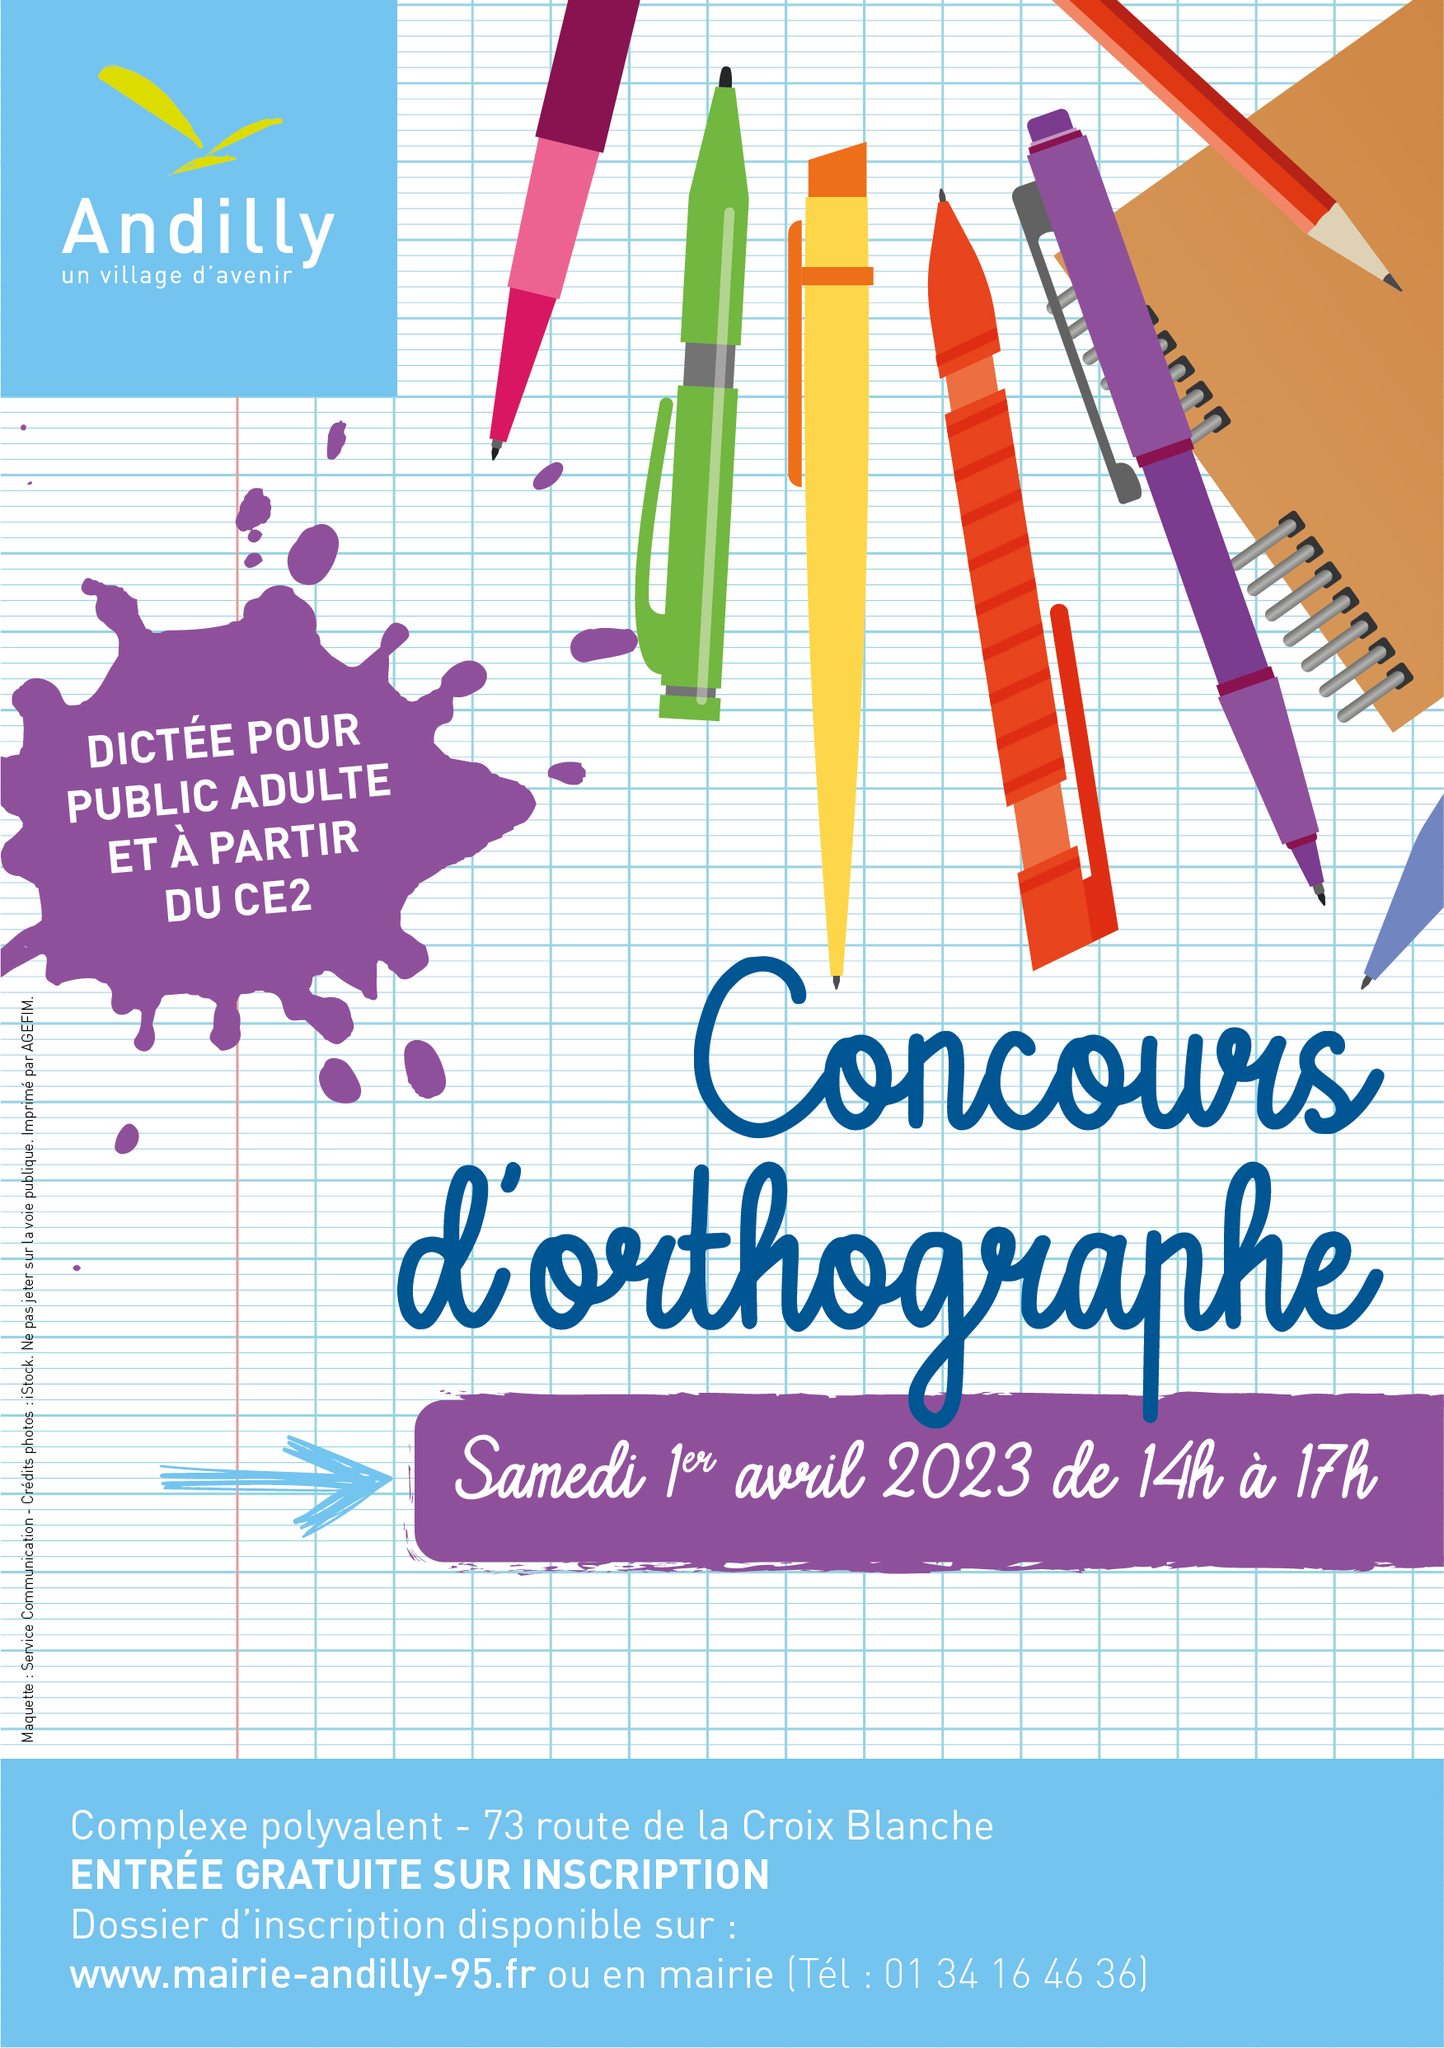 Concours d'orthographe à Andilly - 1er avril 2023